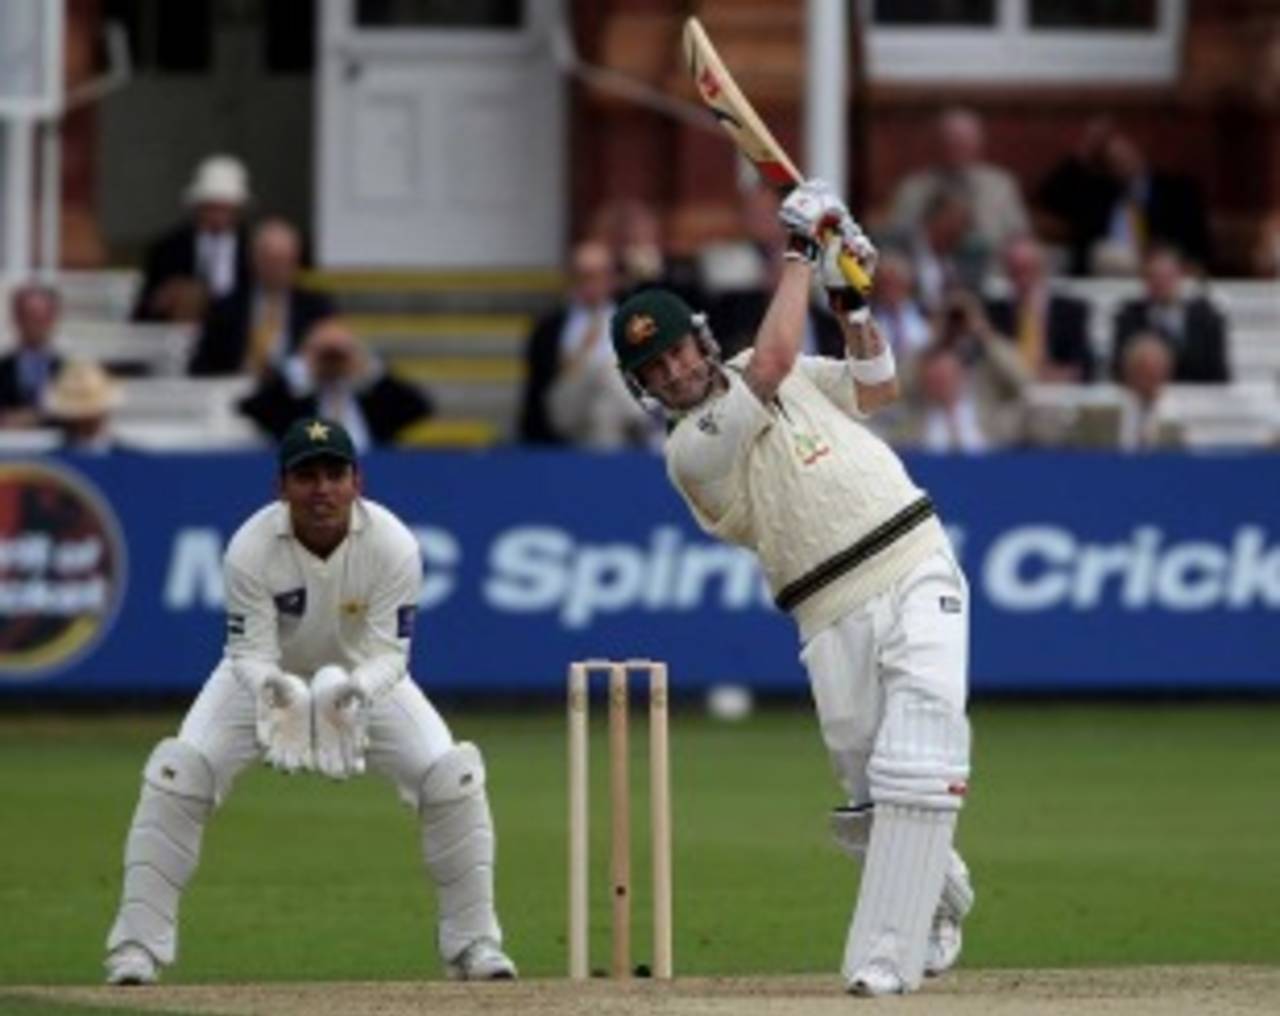 Michael Clarke used his feet well against the spinners, Pakistan v Australia, 1st Test, Lord's, July 13, 2010